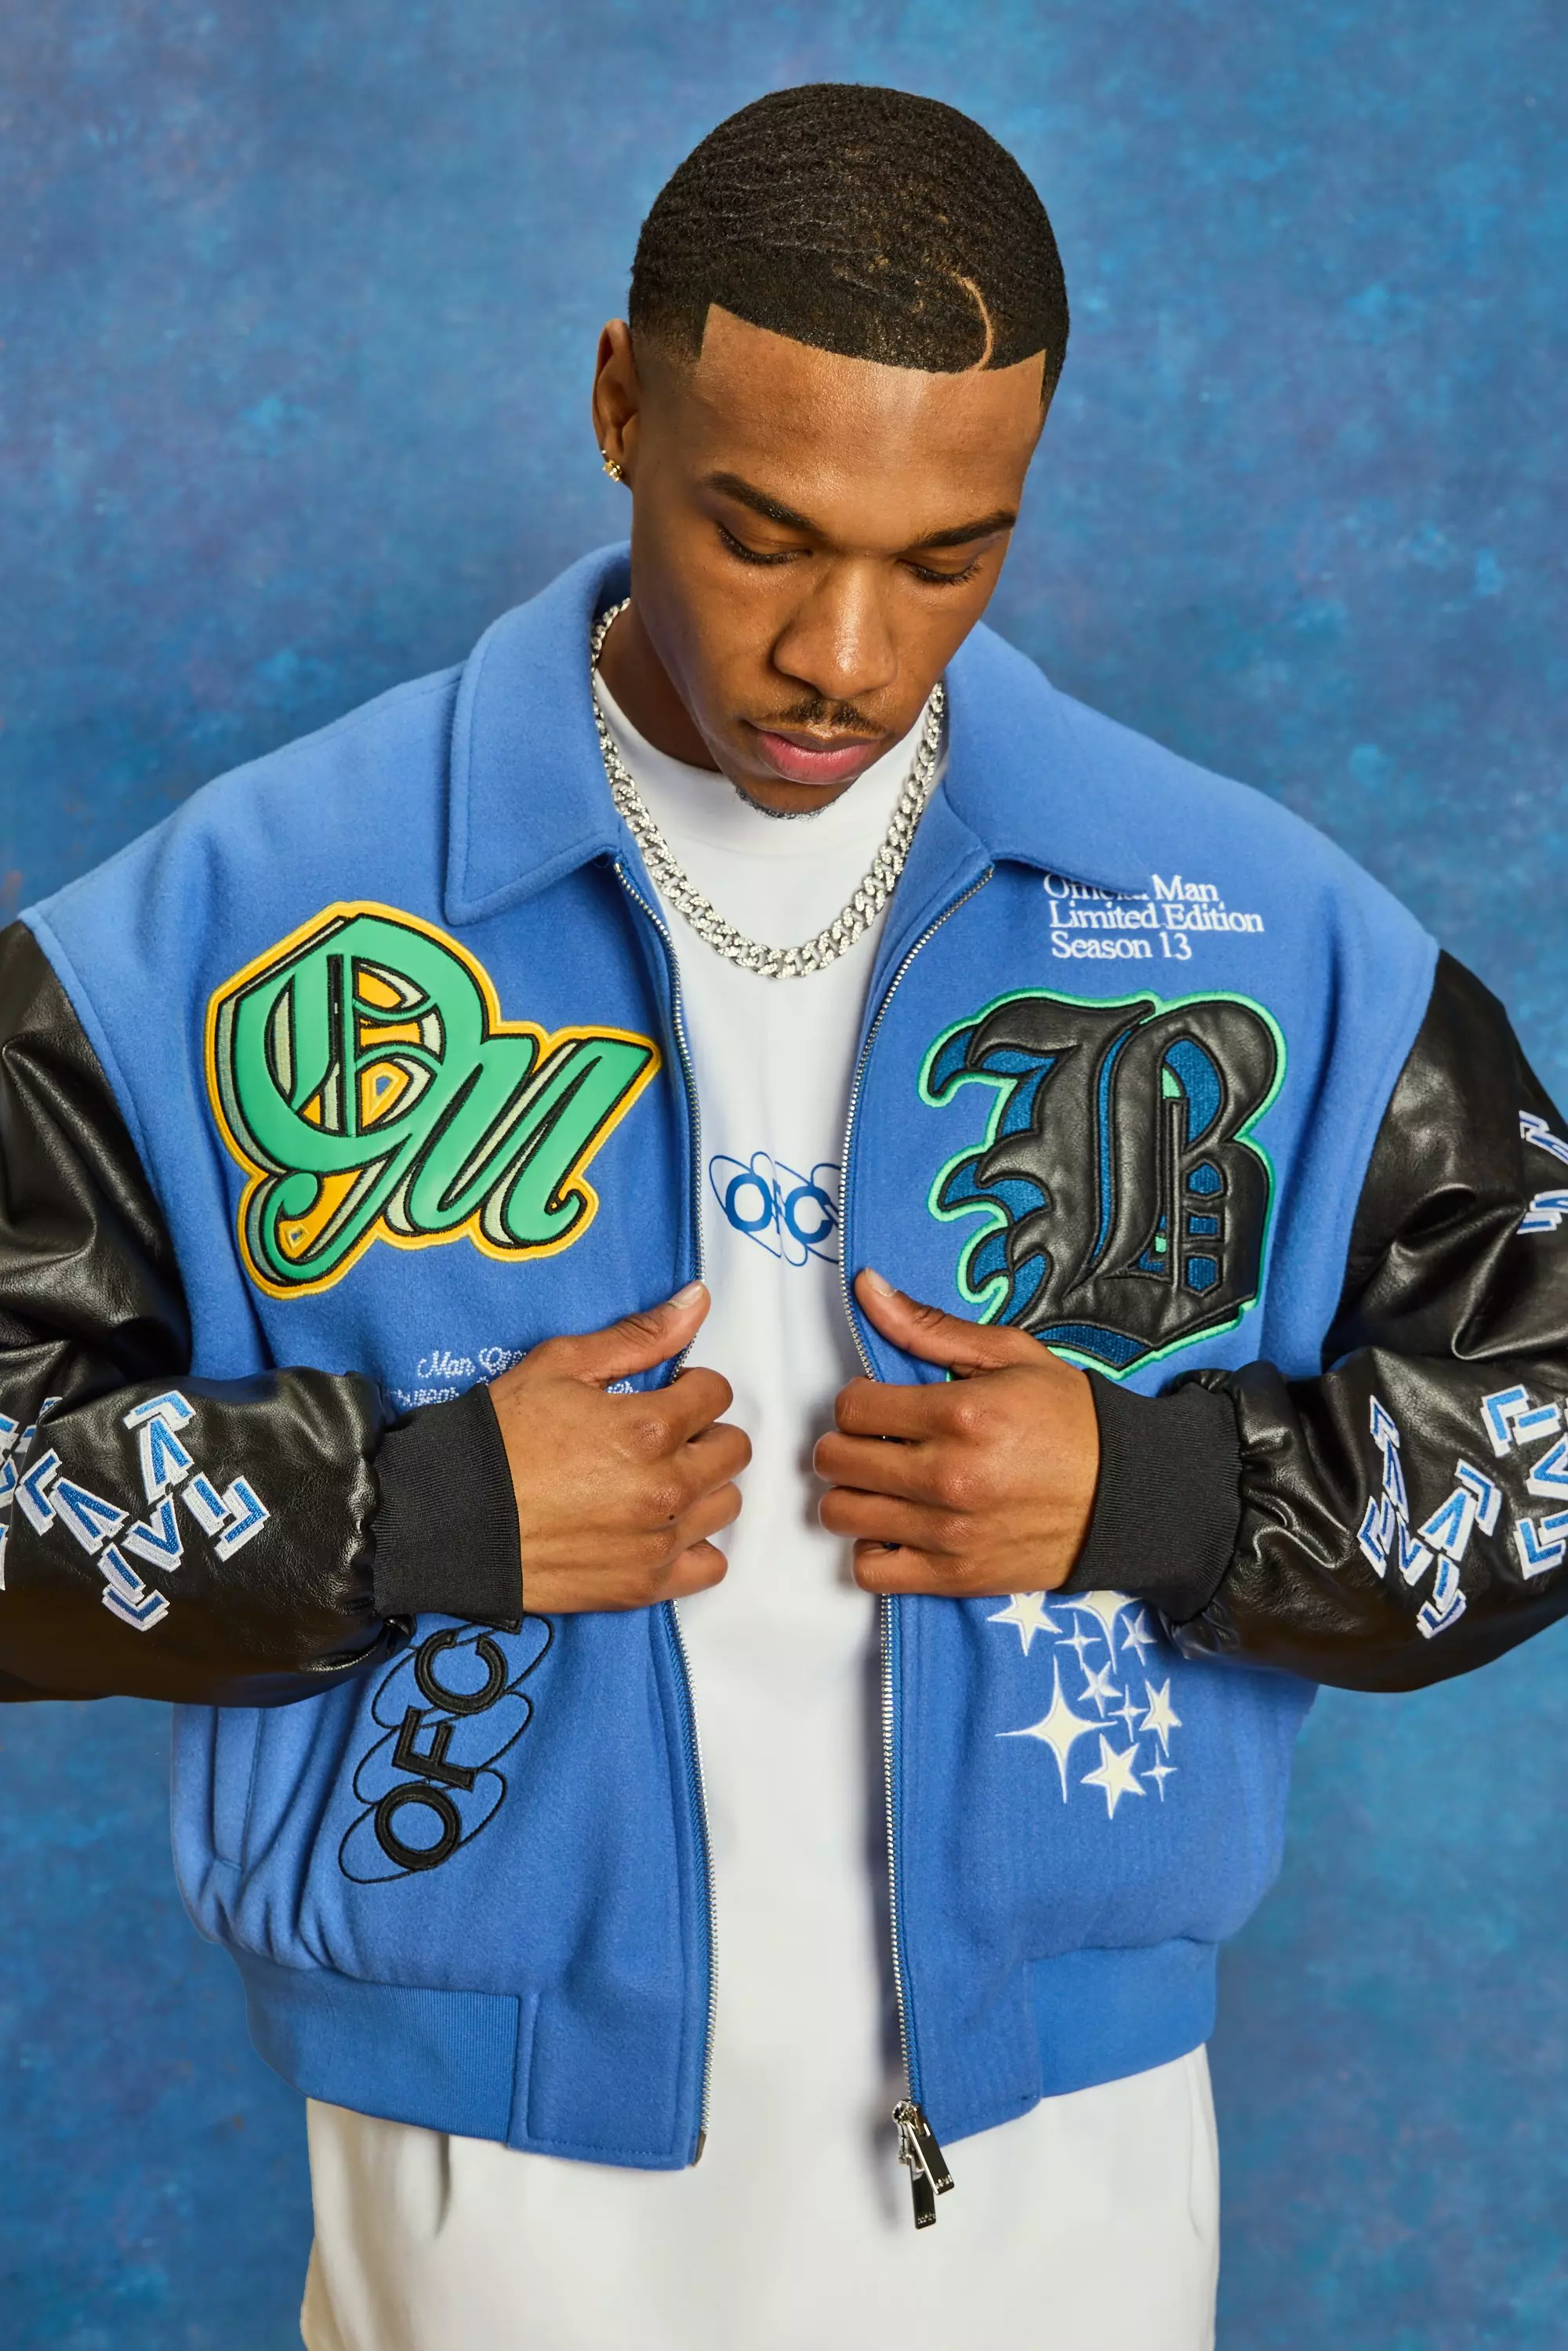 Men's Green Varsity Jacket | The Couture Club